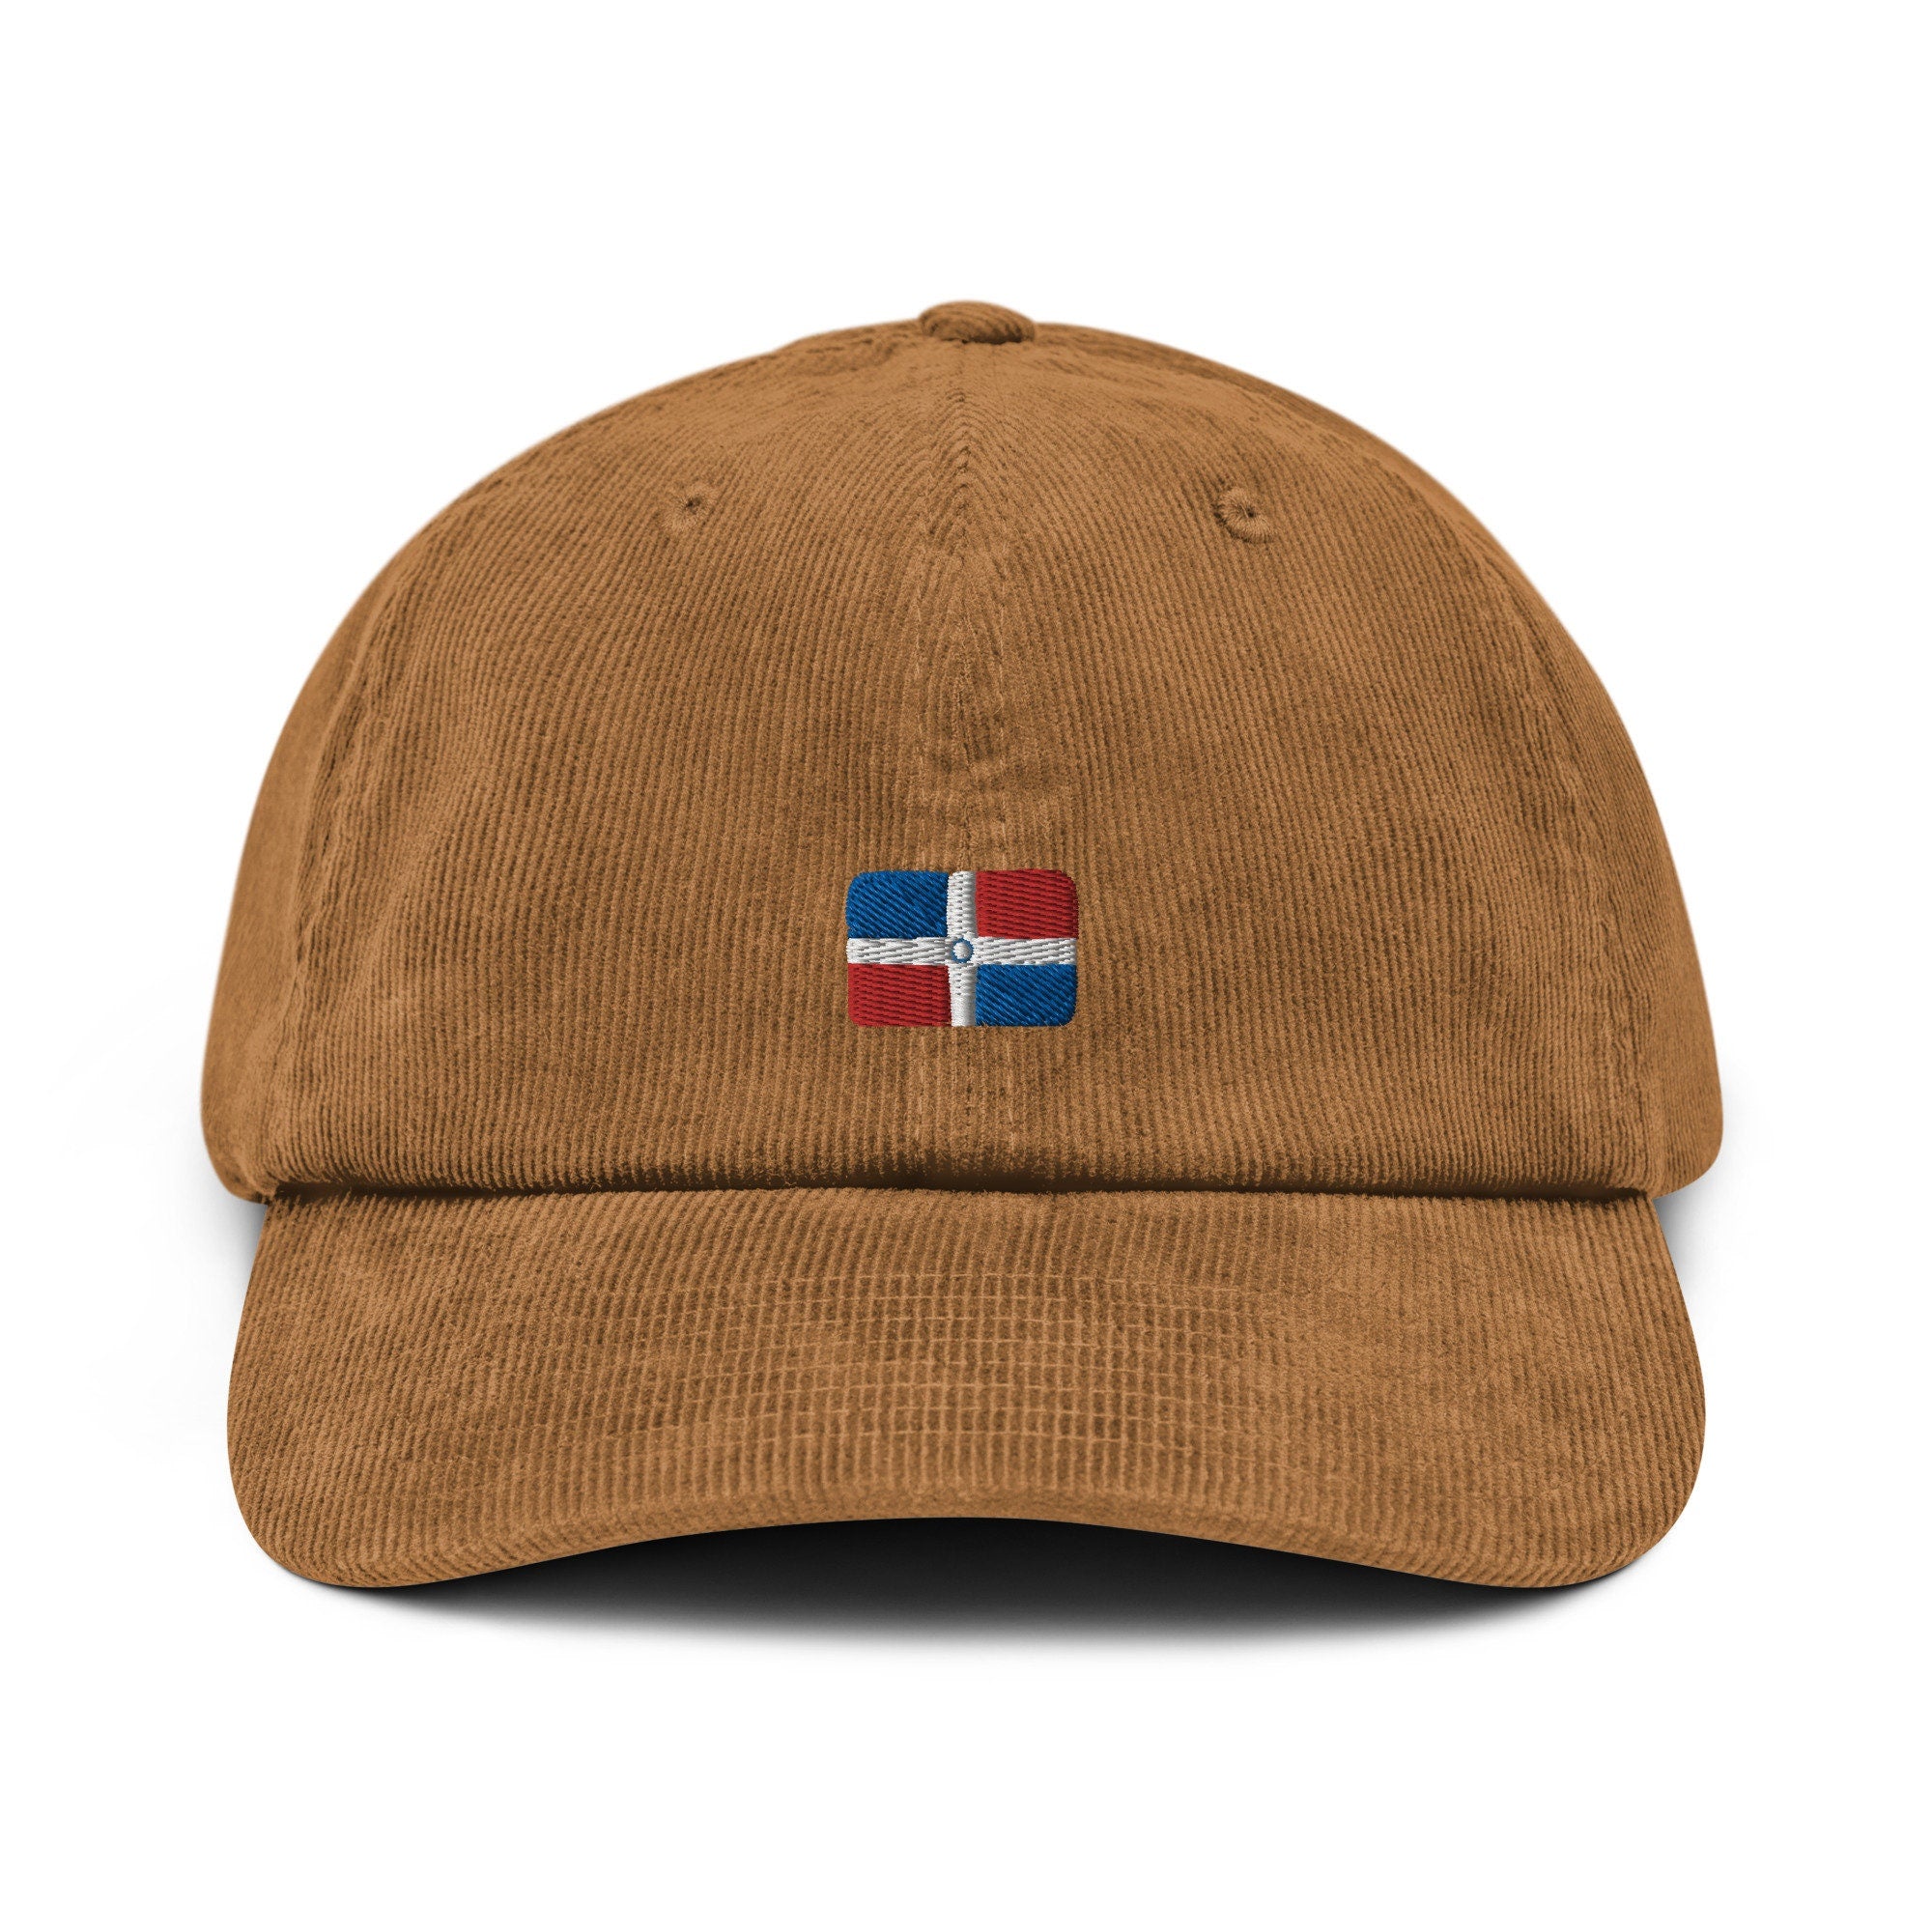 Dominican Republic Corduroy Hat, Dominican Country Gift, Embroidered Dominican Flag, Handmade Dominican Flag Corduroy Hat, Dominican Flag